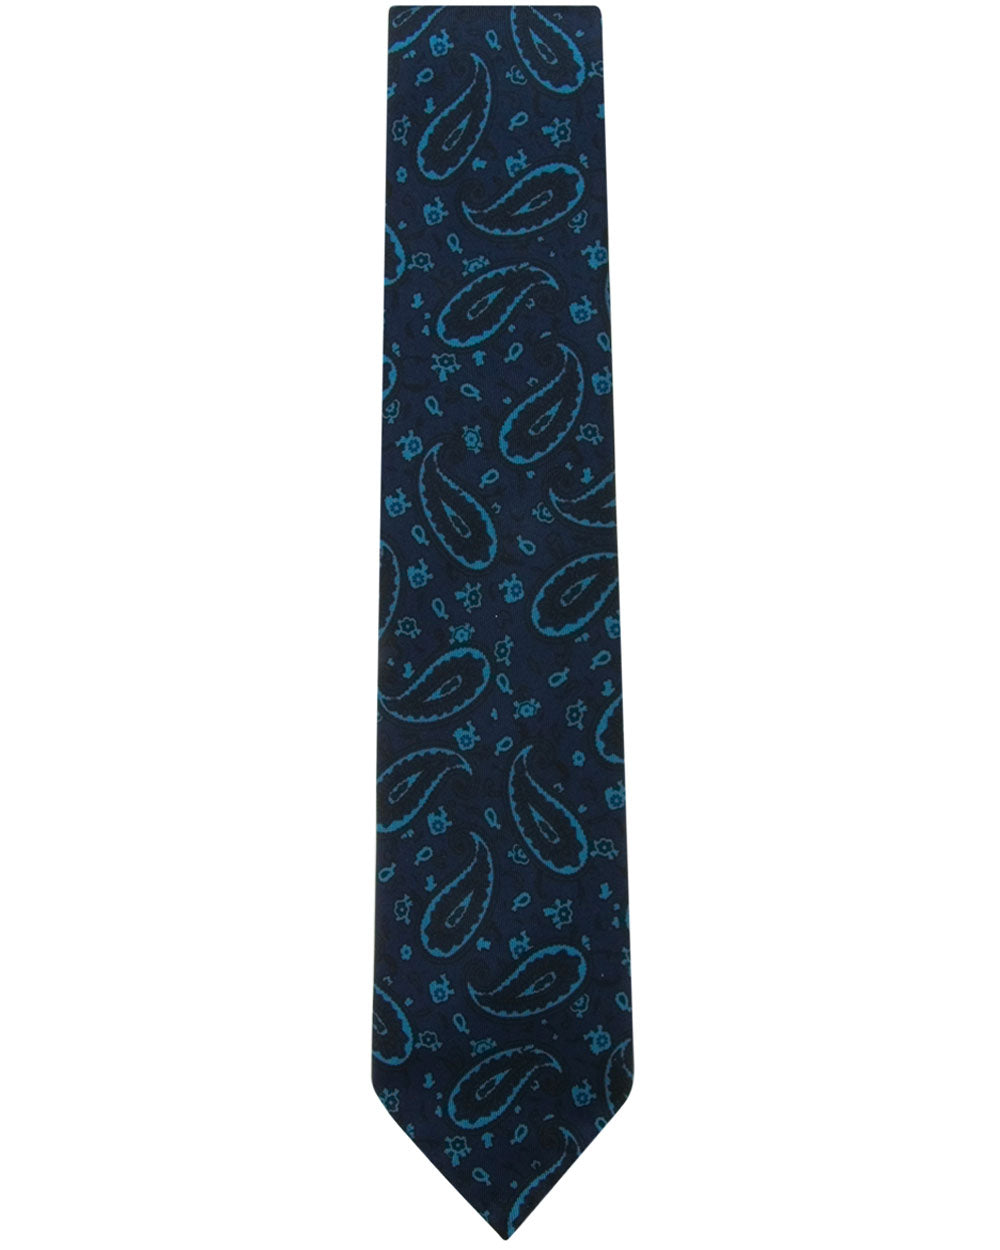 Navy and Light Blue Paisley Tie